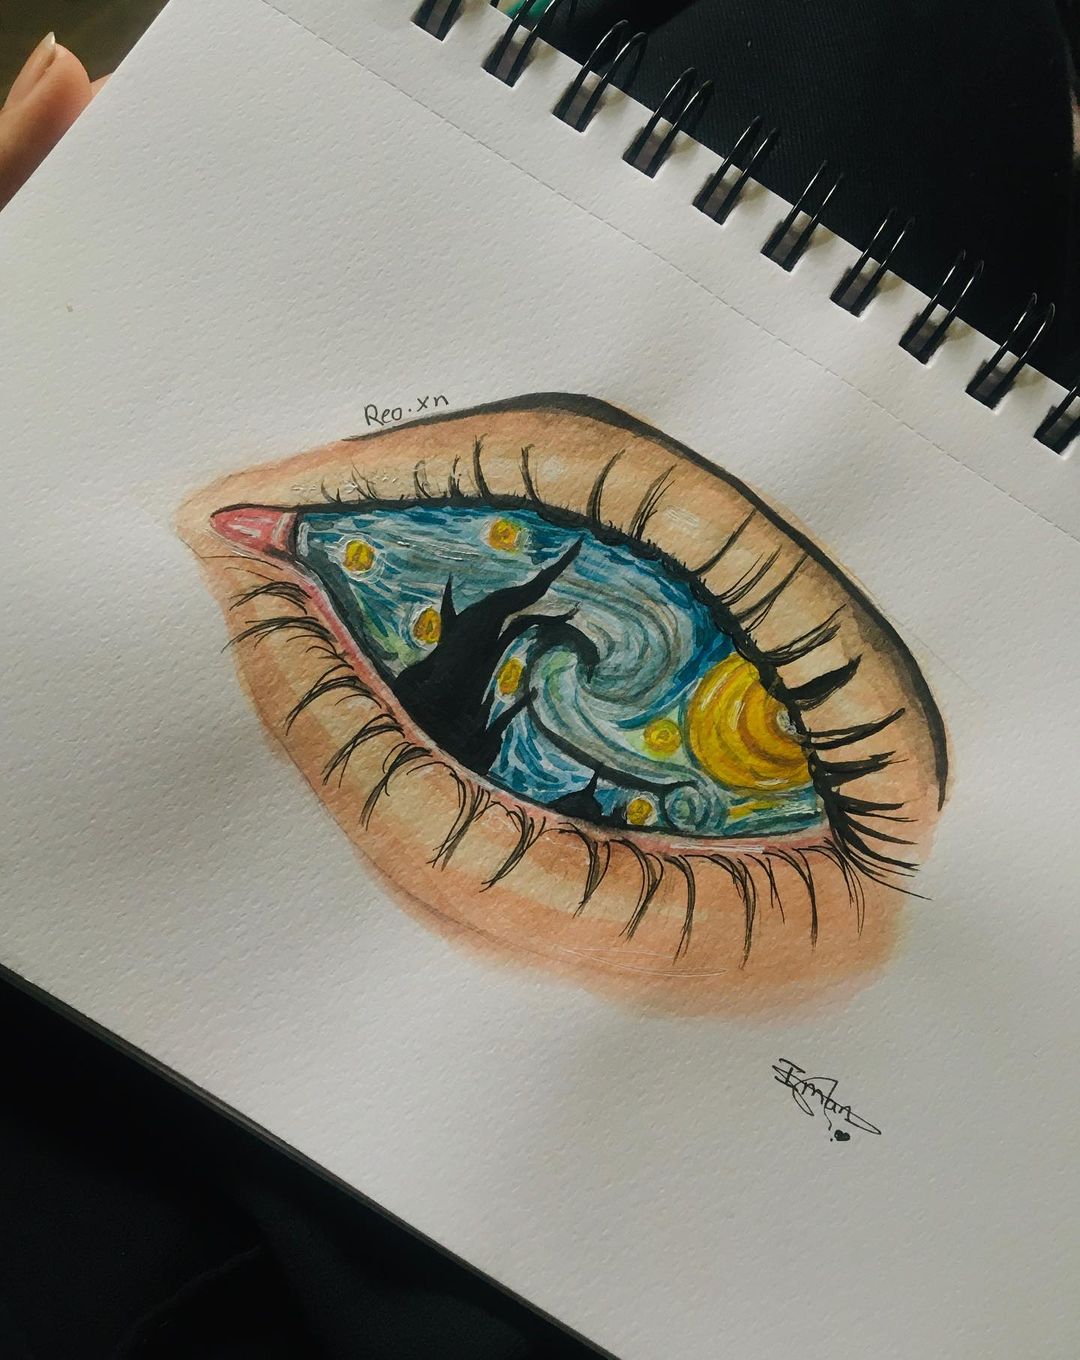 9. @reo.xn sketch of an eye with Van Gogh's Starry Night in place of the iris and pupil